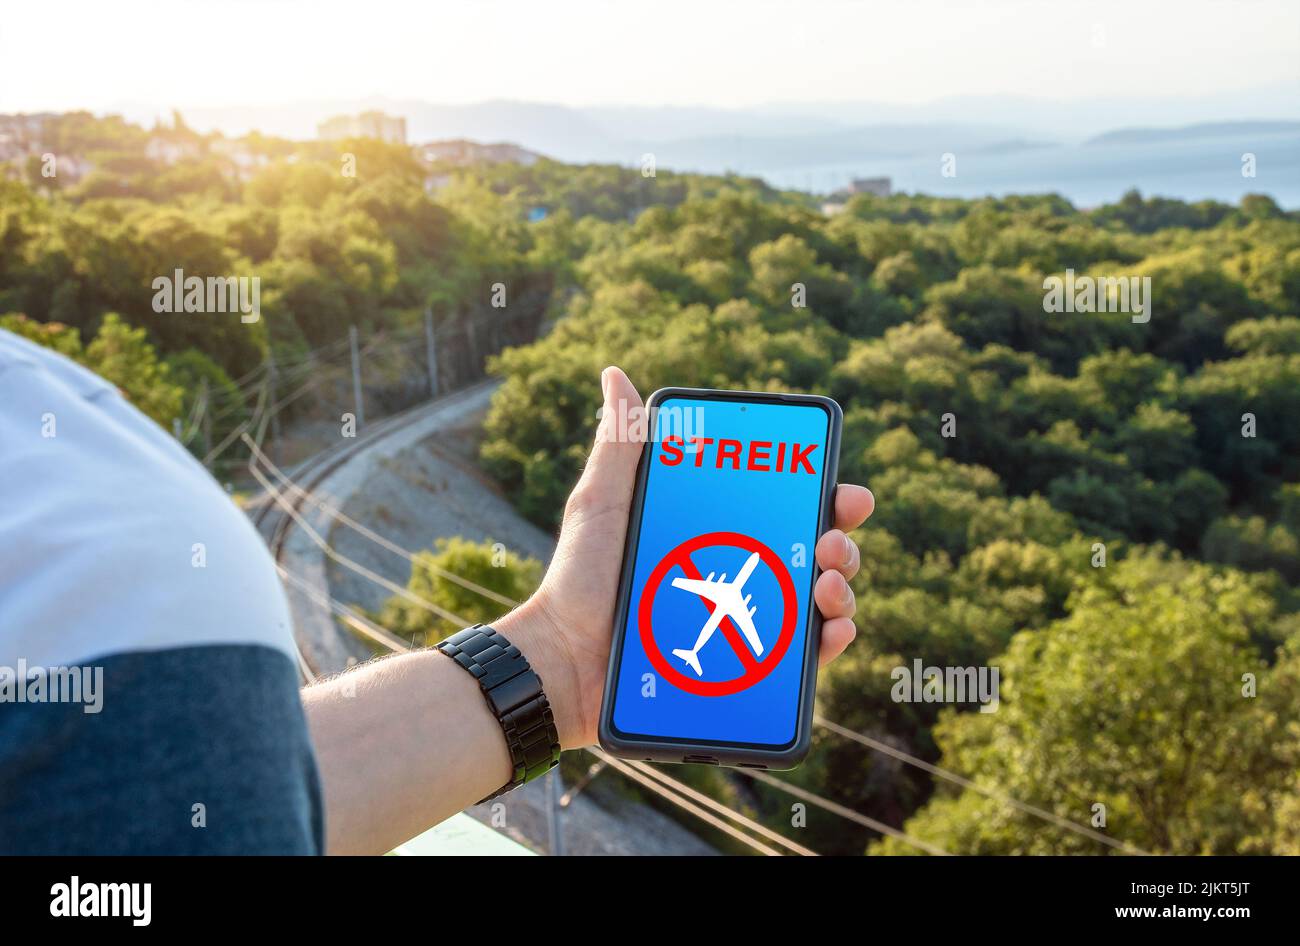 A Man Is Holding A Smartphone With A Notice On The Screen Strike, Flight Strike And Pilots Strike. Canceled Canceled Flight Icon Image PHOTOMONTAGE Stock Photo